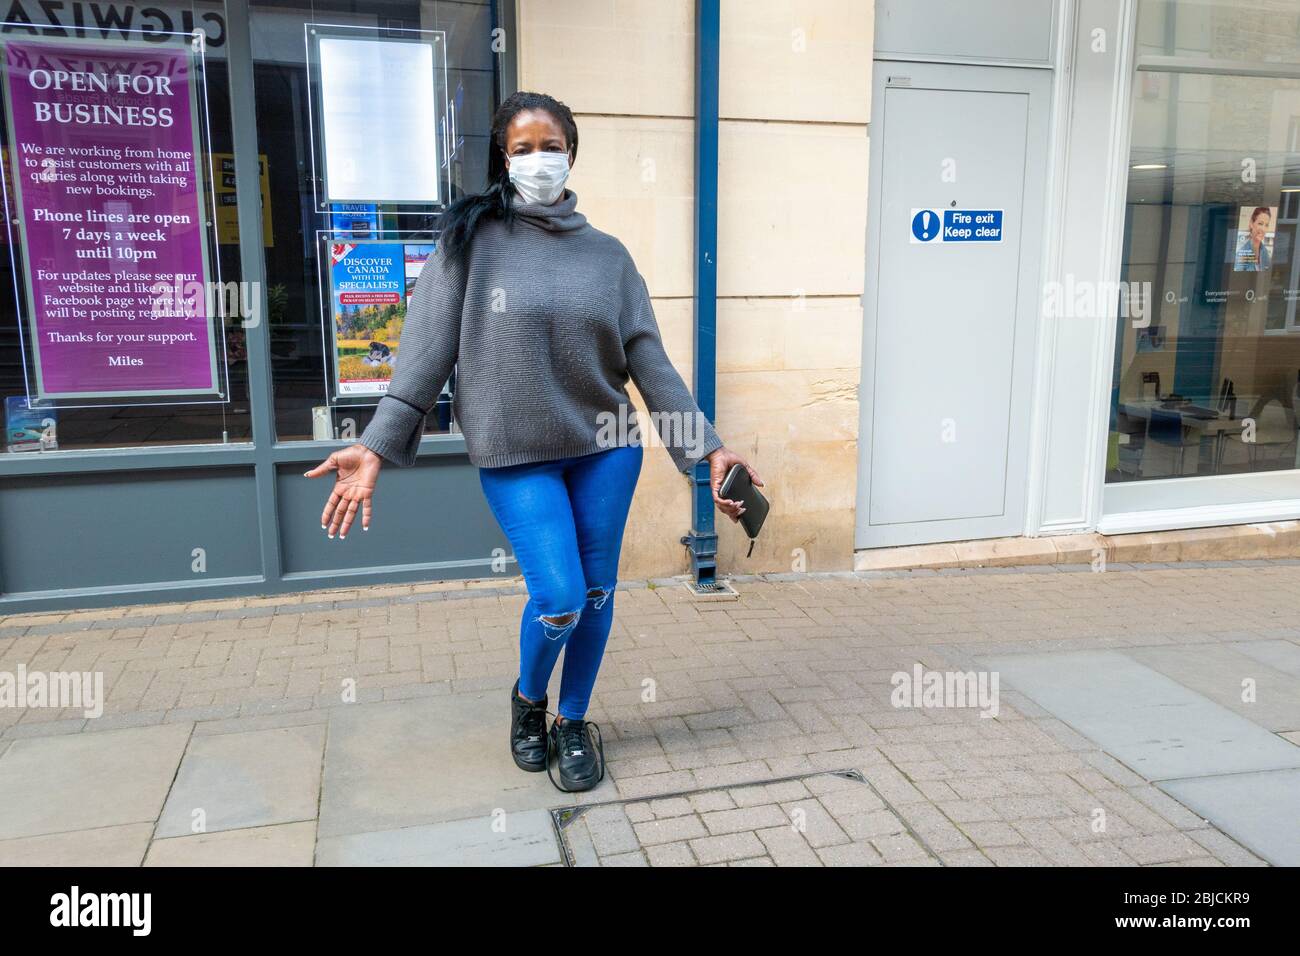 A woman poses in the street wearing a face mask Stock Photo